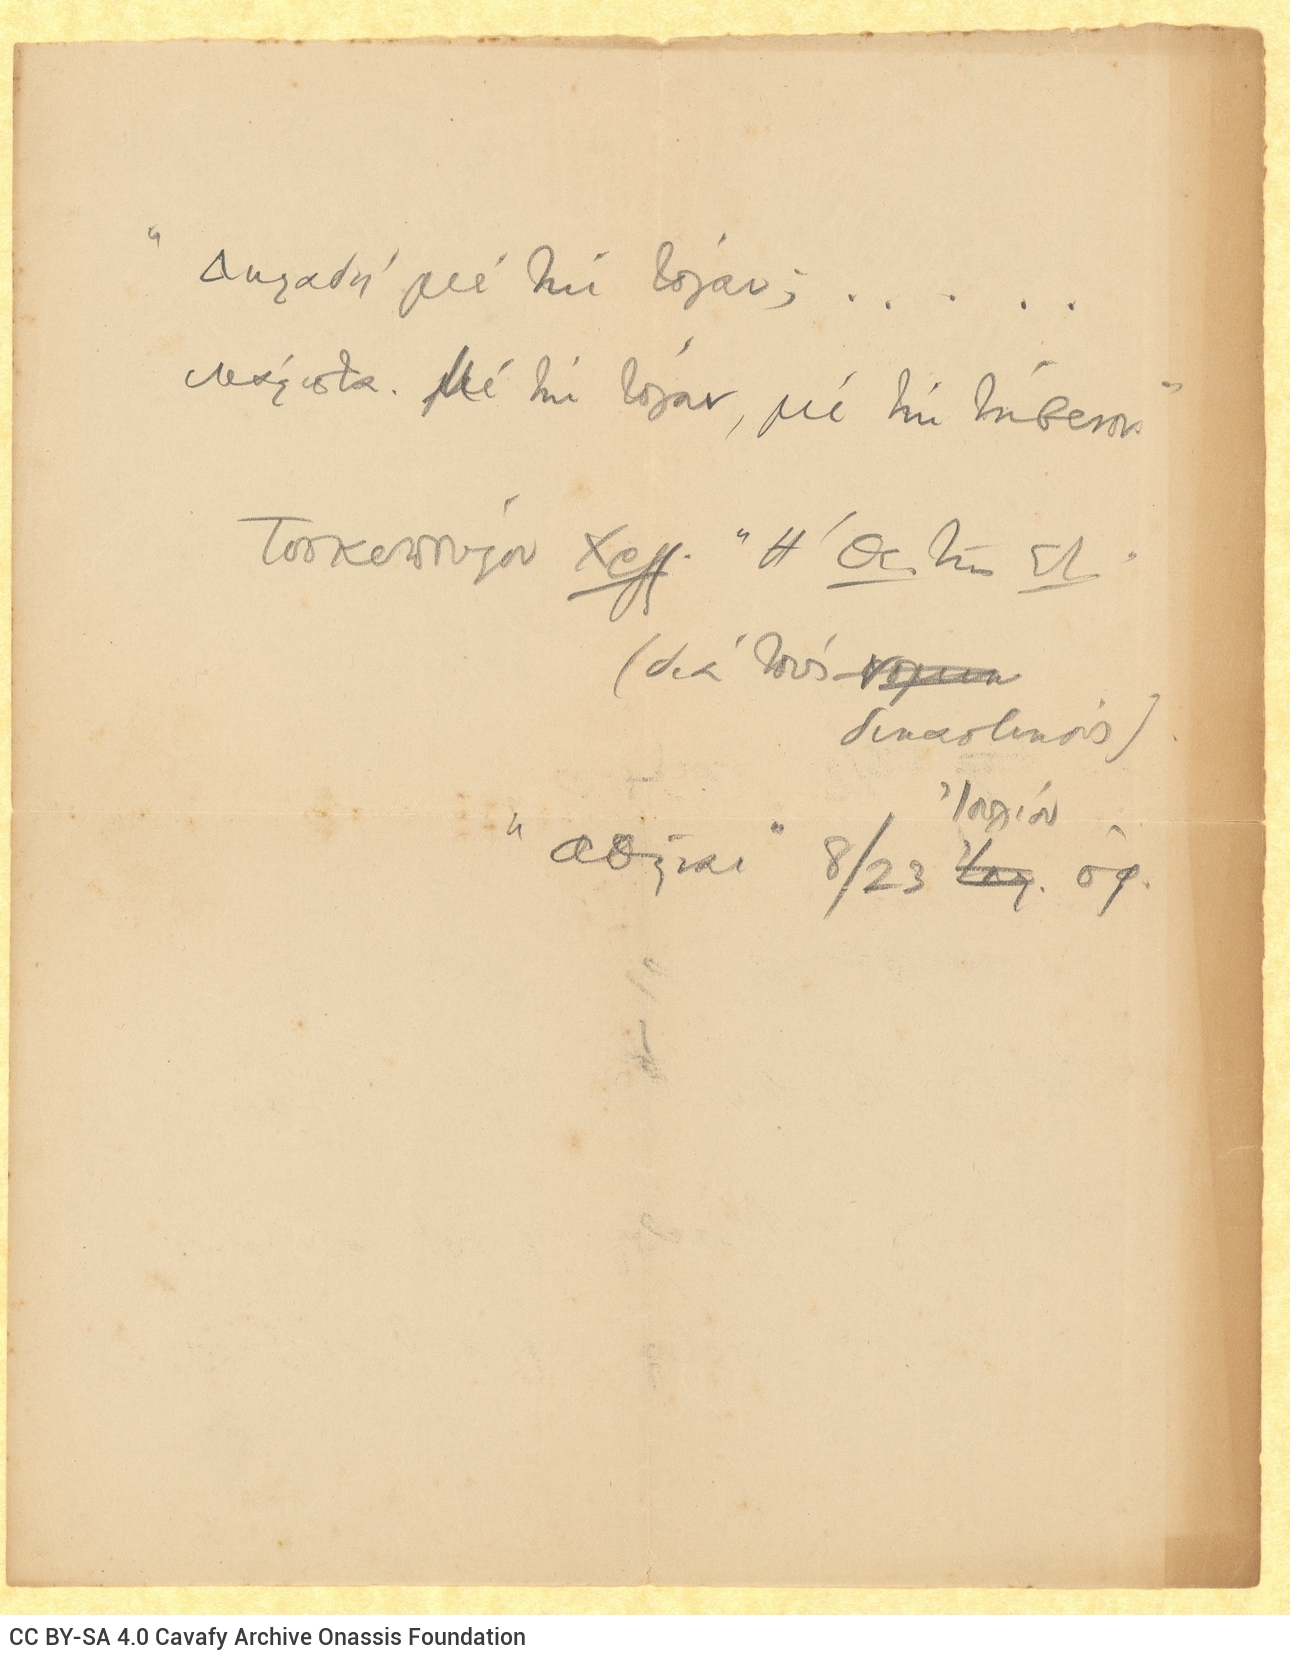 Handwritten note on one side of a sheet, regarding the "toga". Reference to the newspaper *Athinai* of 8/23 July 1909.